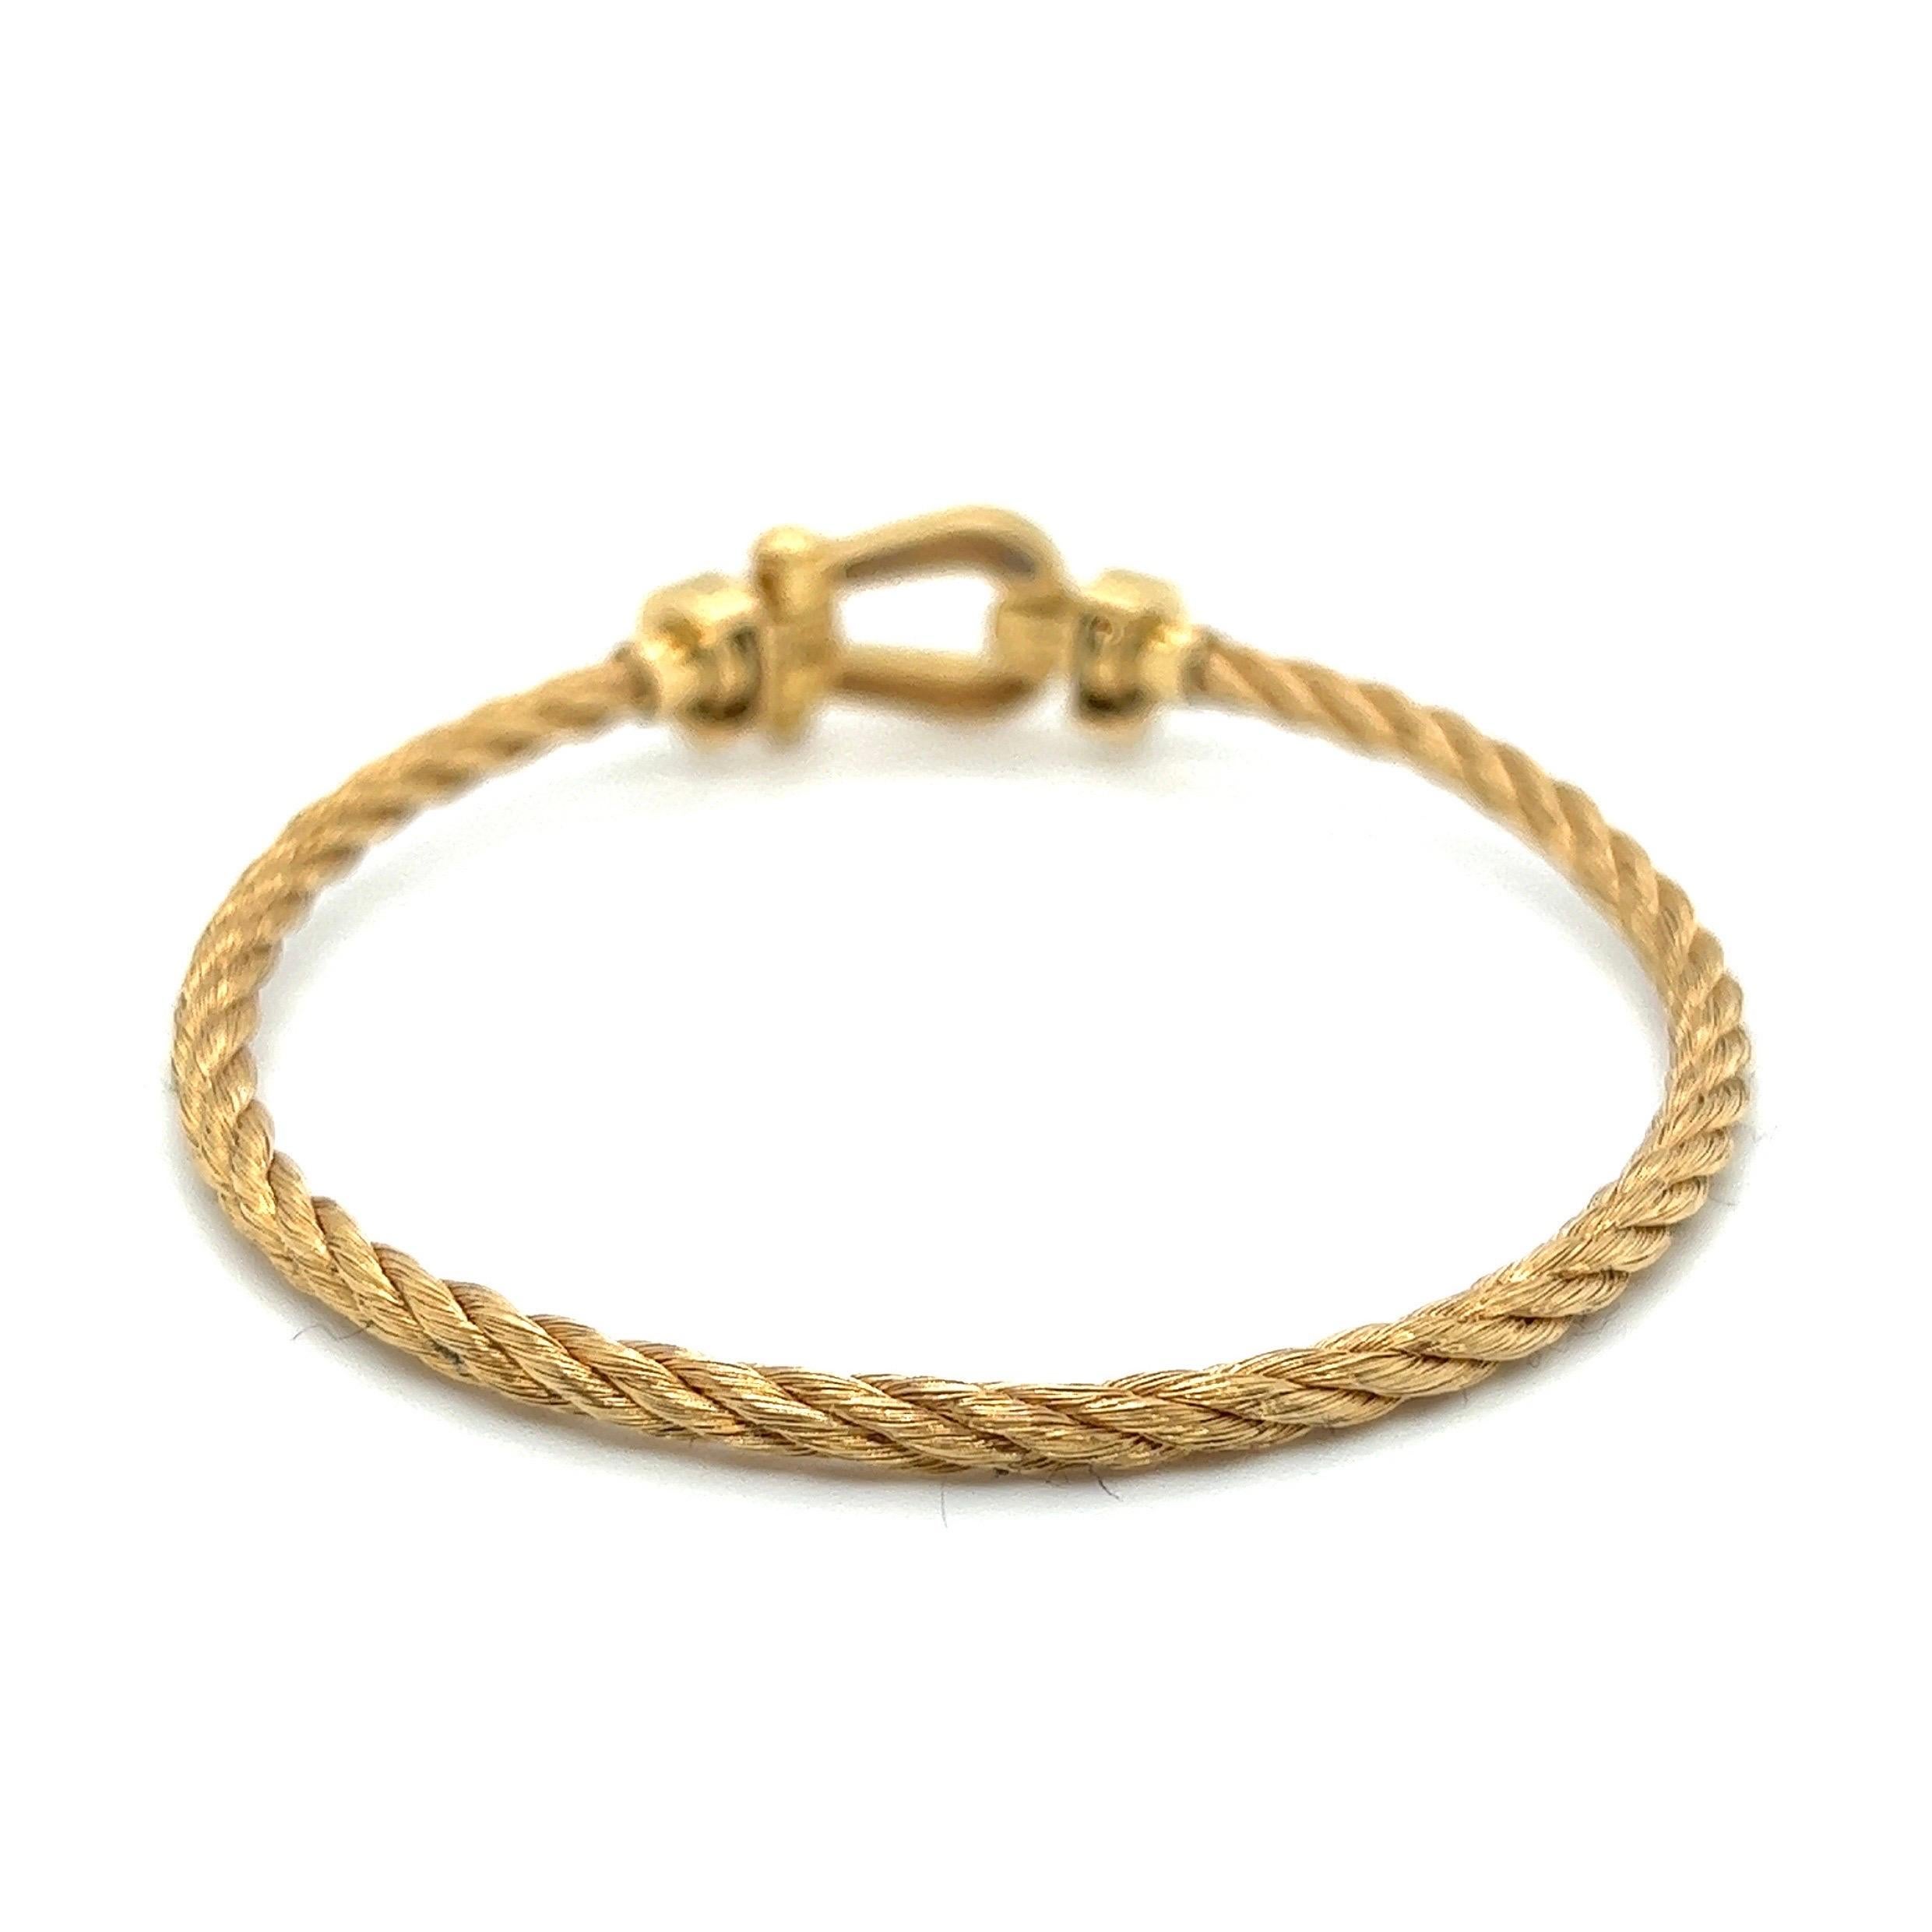 Smart casual 18 karat yellow gold and diamond Force 10 Bracelet by renowned French jewerly house Fred.

Bracelet of maritim inspired design, crafted in yellow gold 750 and composed of woven gold wire, at the front decorated with a buckle motif,